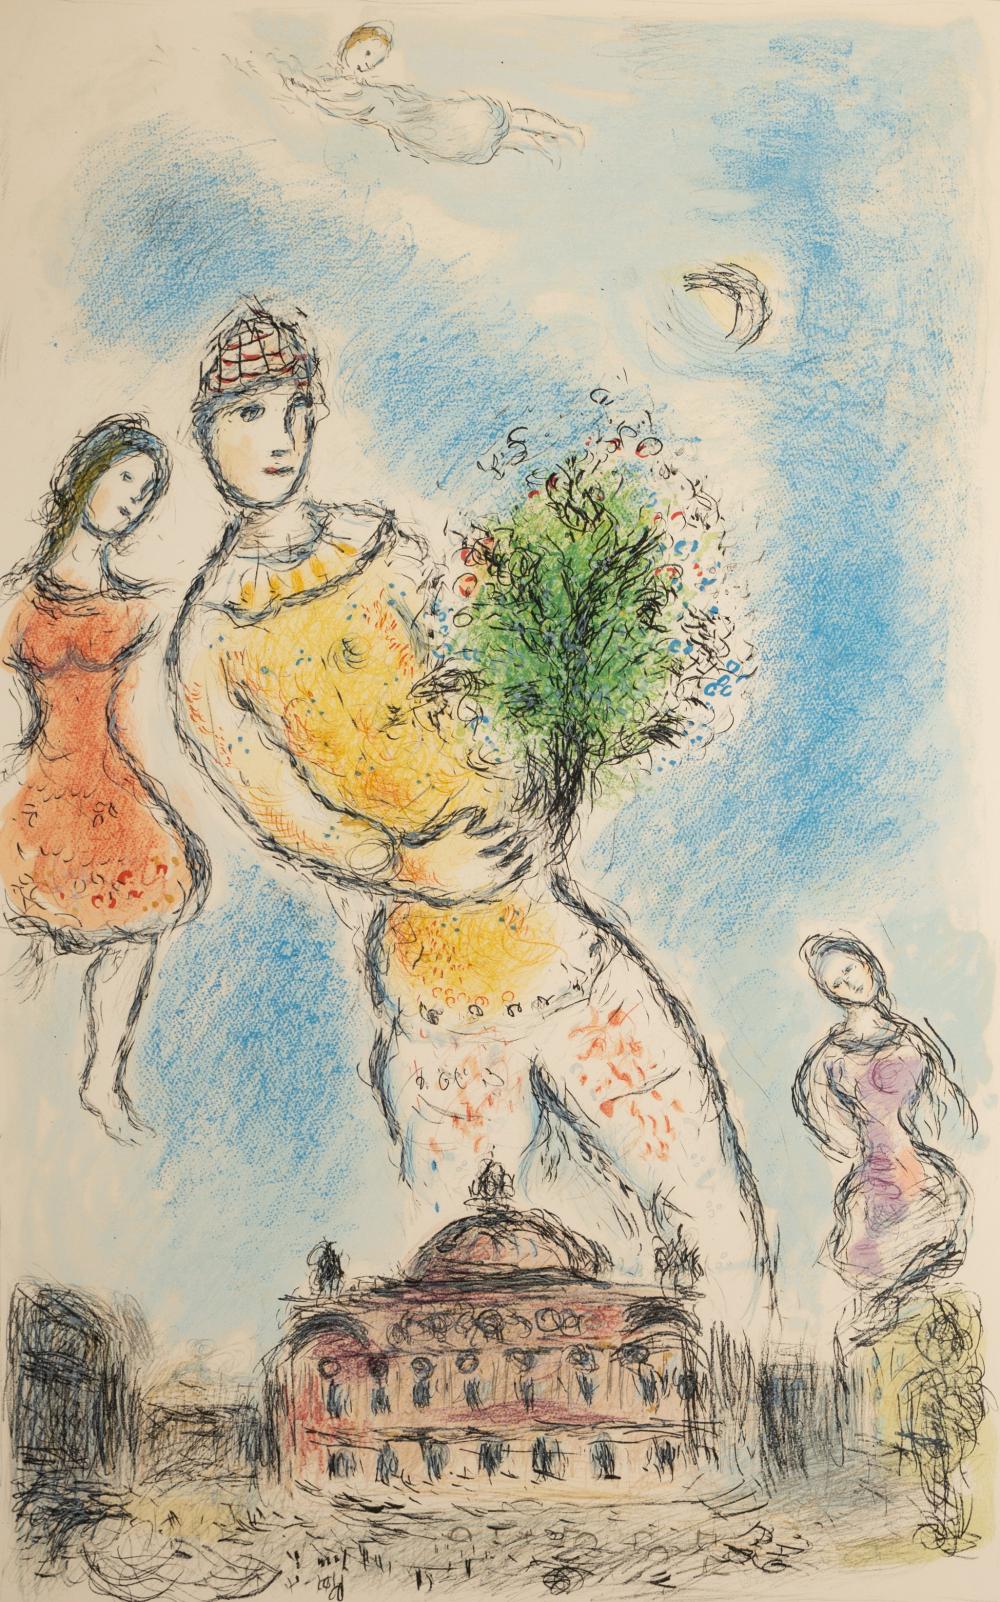 MARC CHAGALL (1887-1985): IN THE